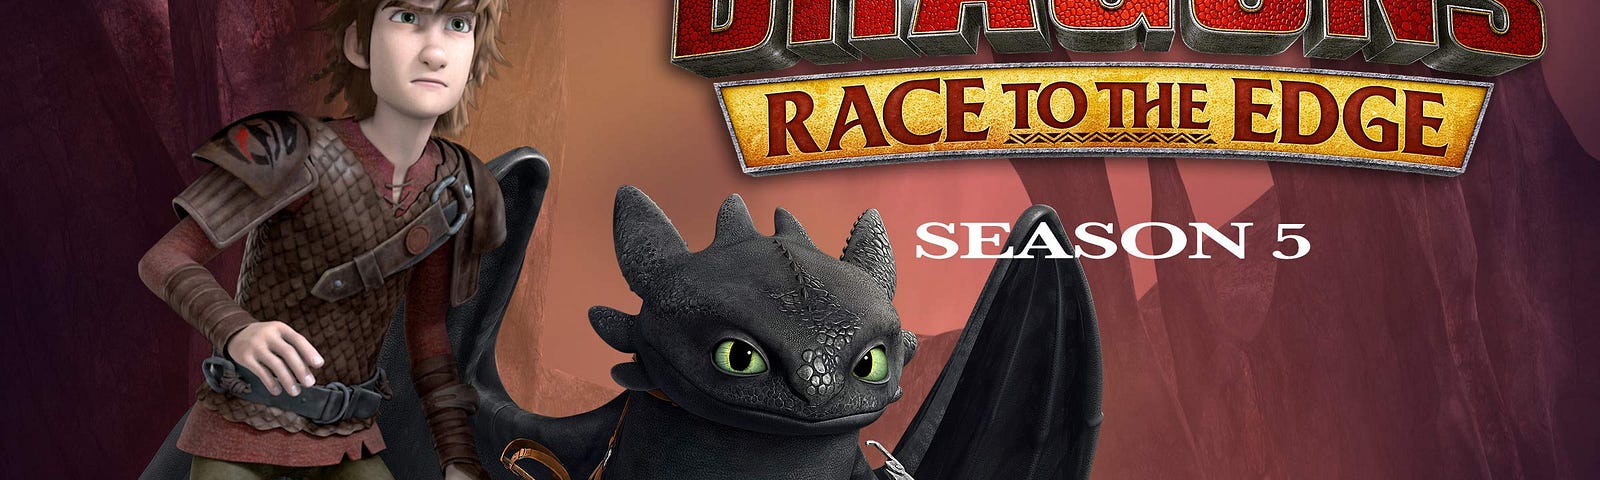 How To Train Your Dragon In 2020: A Return To Race To The Edge, by Priya  Sridhar, Permanent Nerd Network